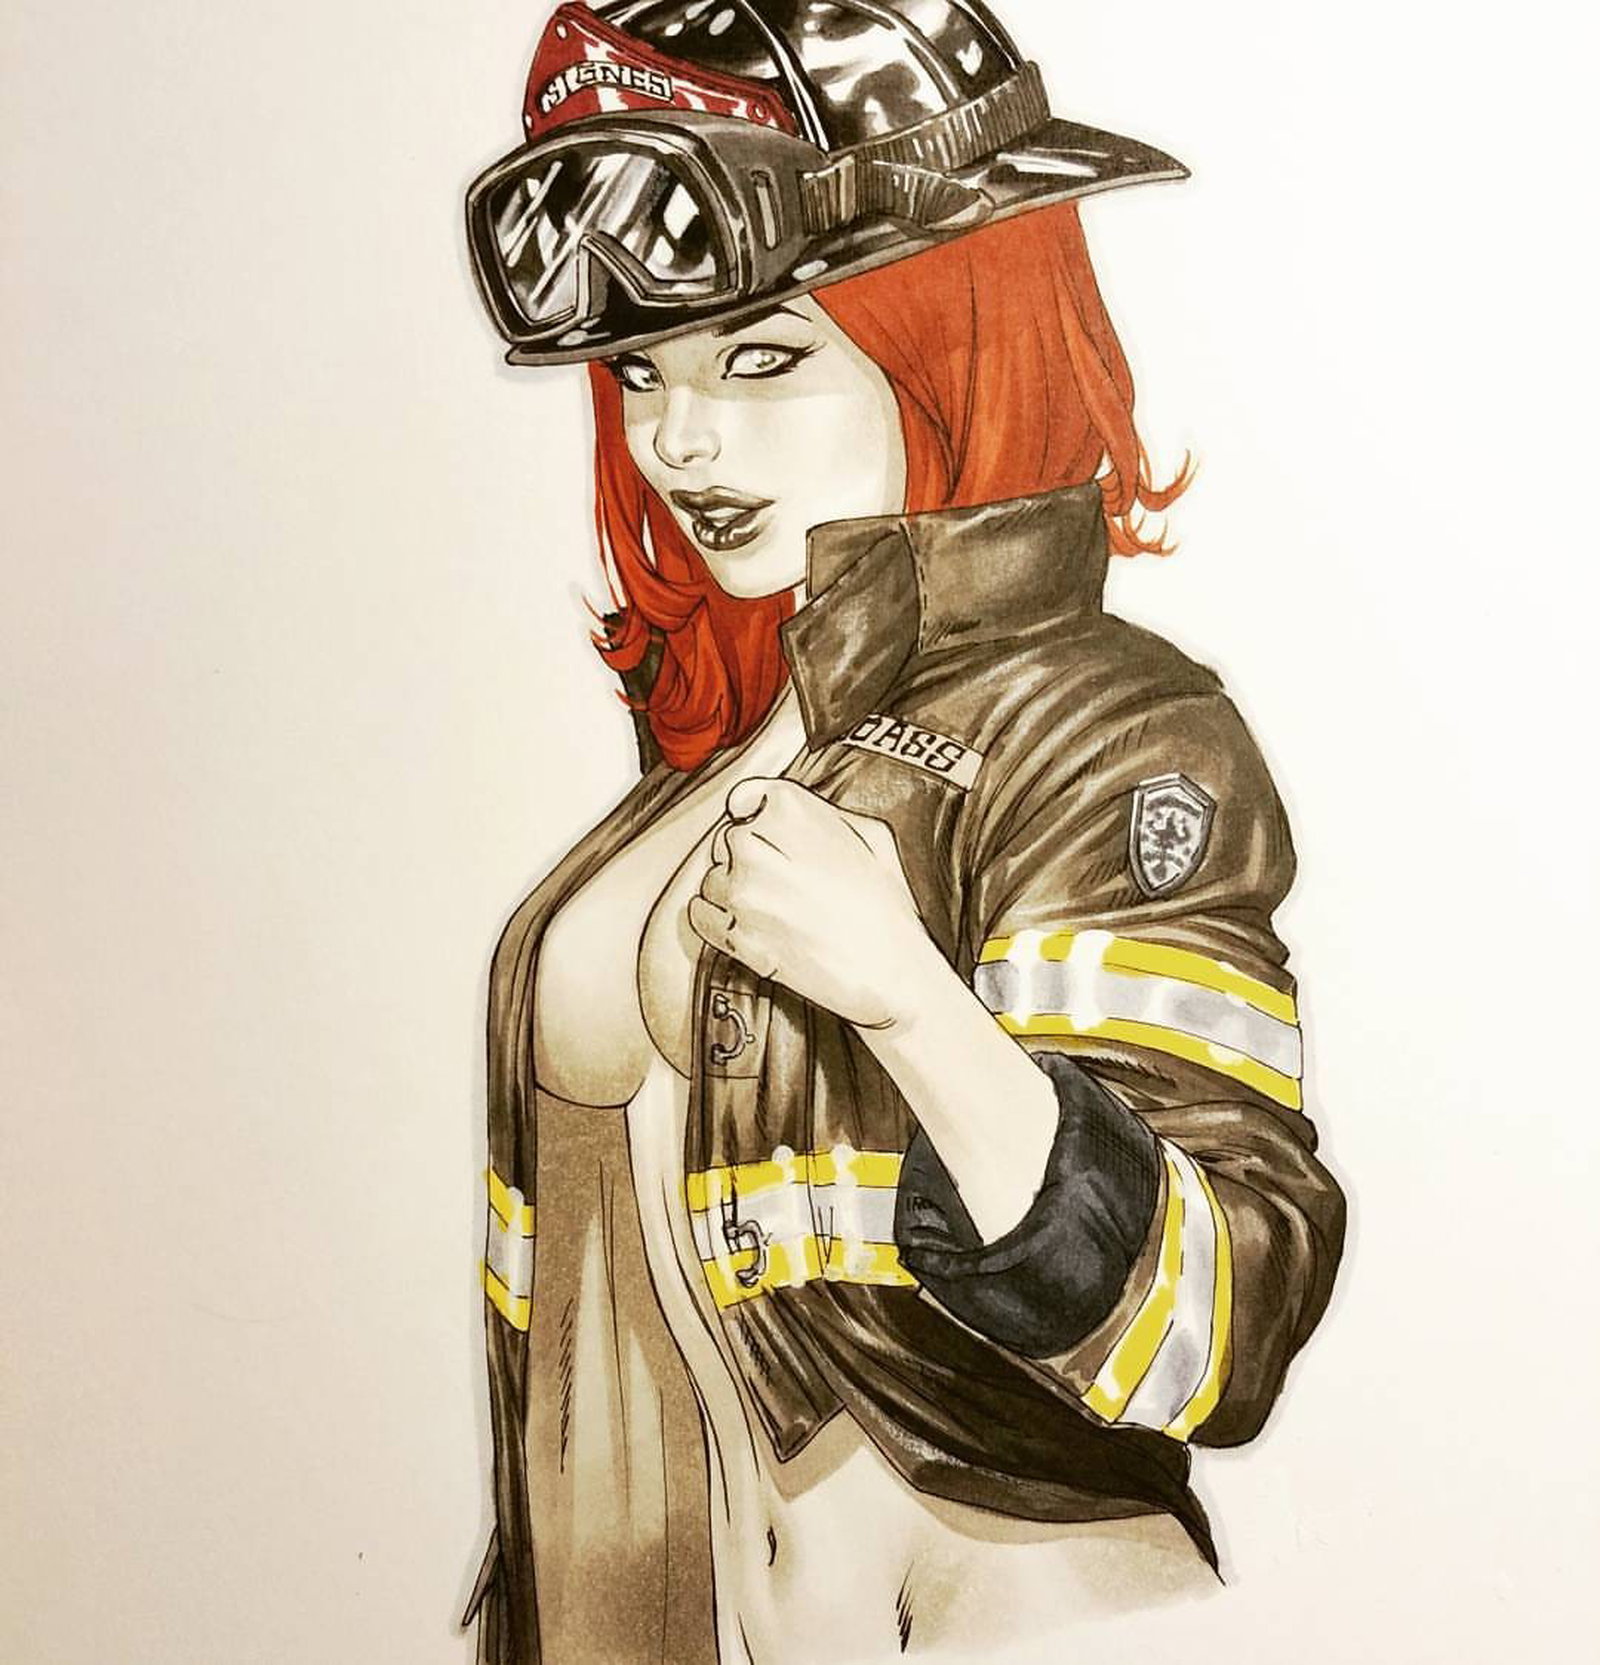 Photo by Justanotherguy with the username @Justanotherguy79,  September 25, 2017 at 1:58 AM and the text says 'i-am-ebas:

Was proud to draw this one,  firefighters are real life hero’s that run towards danger to save lives. 

#copicmarkers #copic #ericbasalduaart #ericbasaldua #sexy #firefighter'